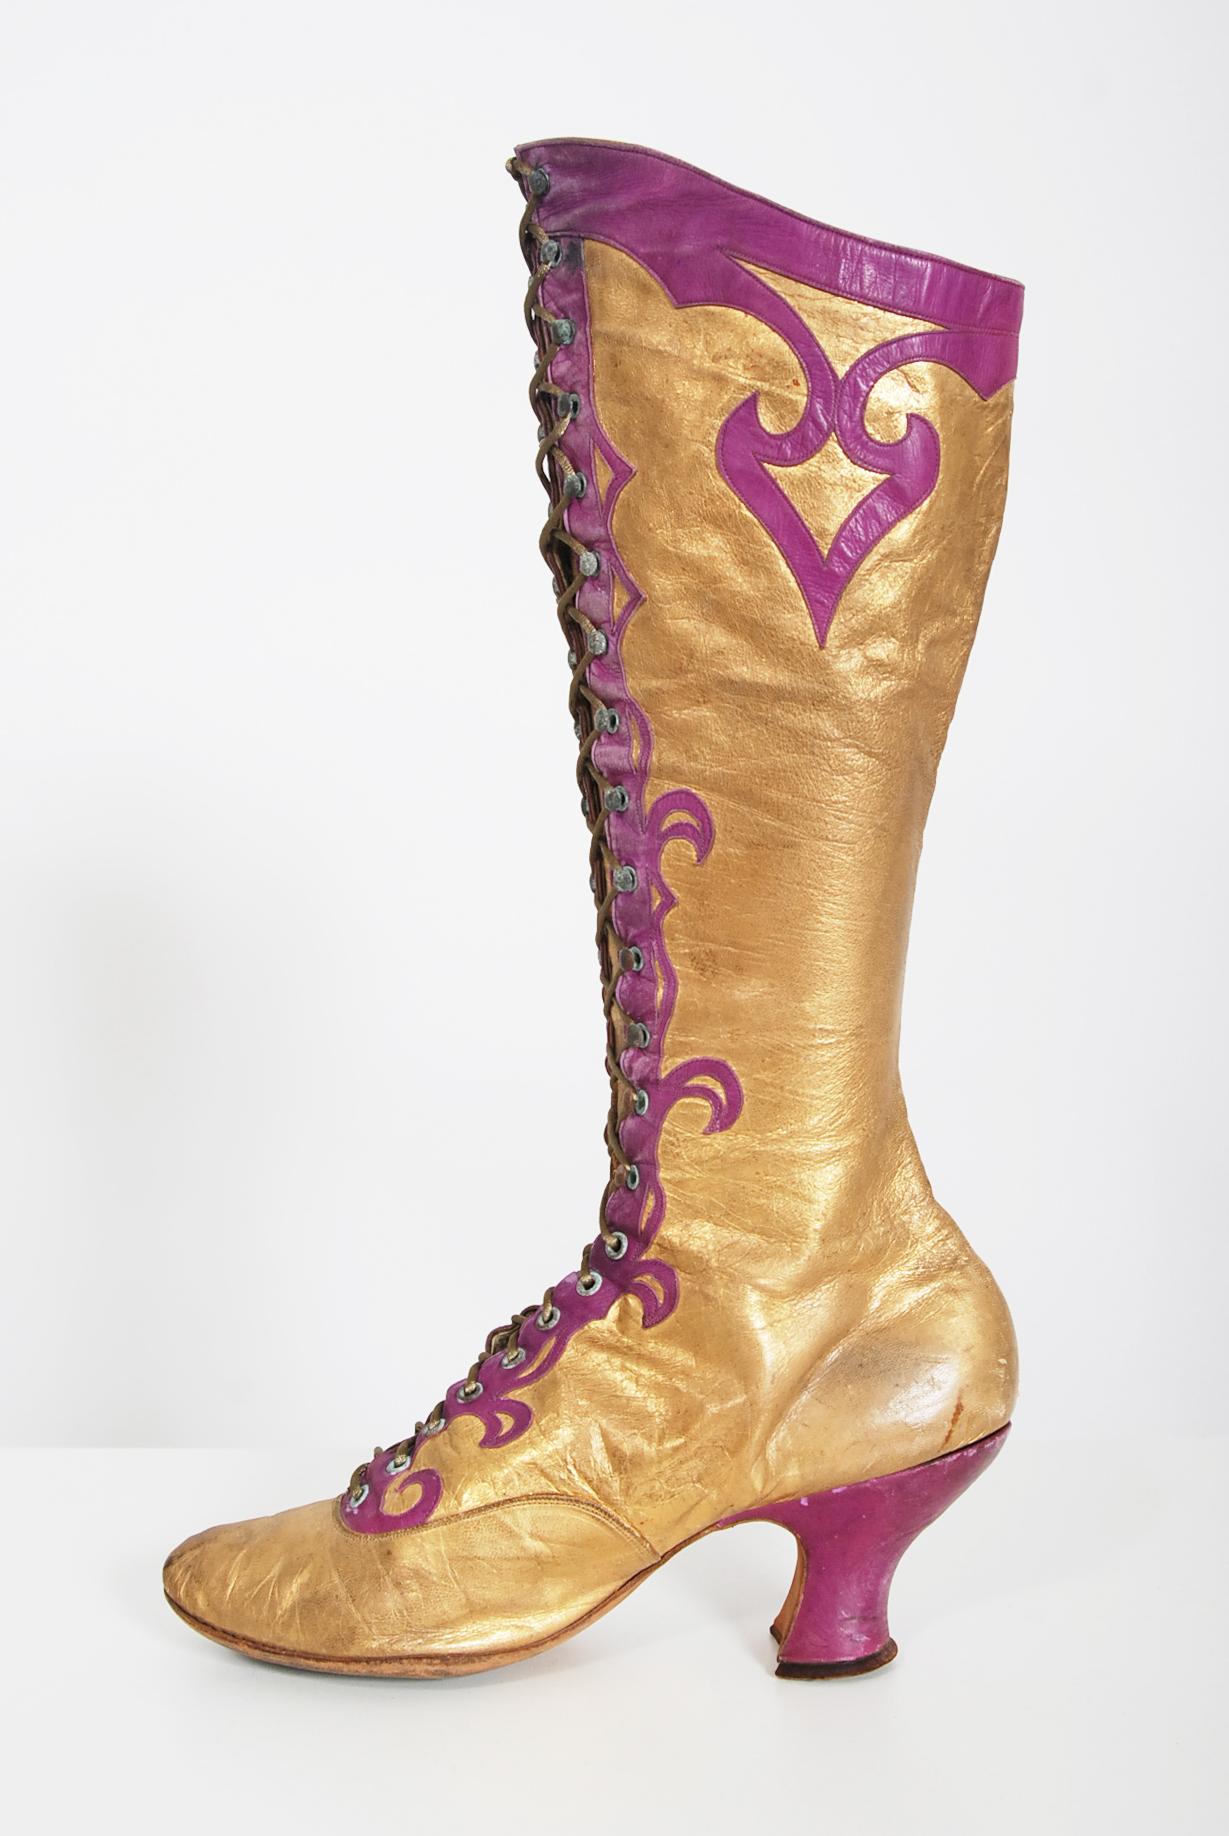 Breathtaking and incredibly hard-to-find pair of Alfred J. Cammeyer antique couture made boots dating back to the 1890's era of fashion. The shoes can be dated to this period by the combination of style and older Cammeyer label. During the Victorian